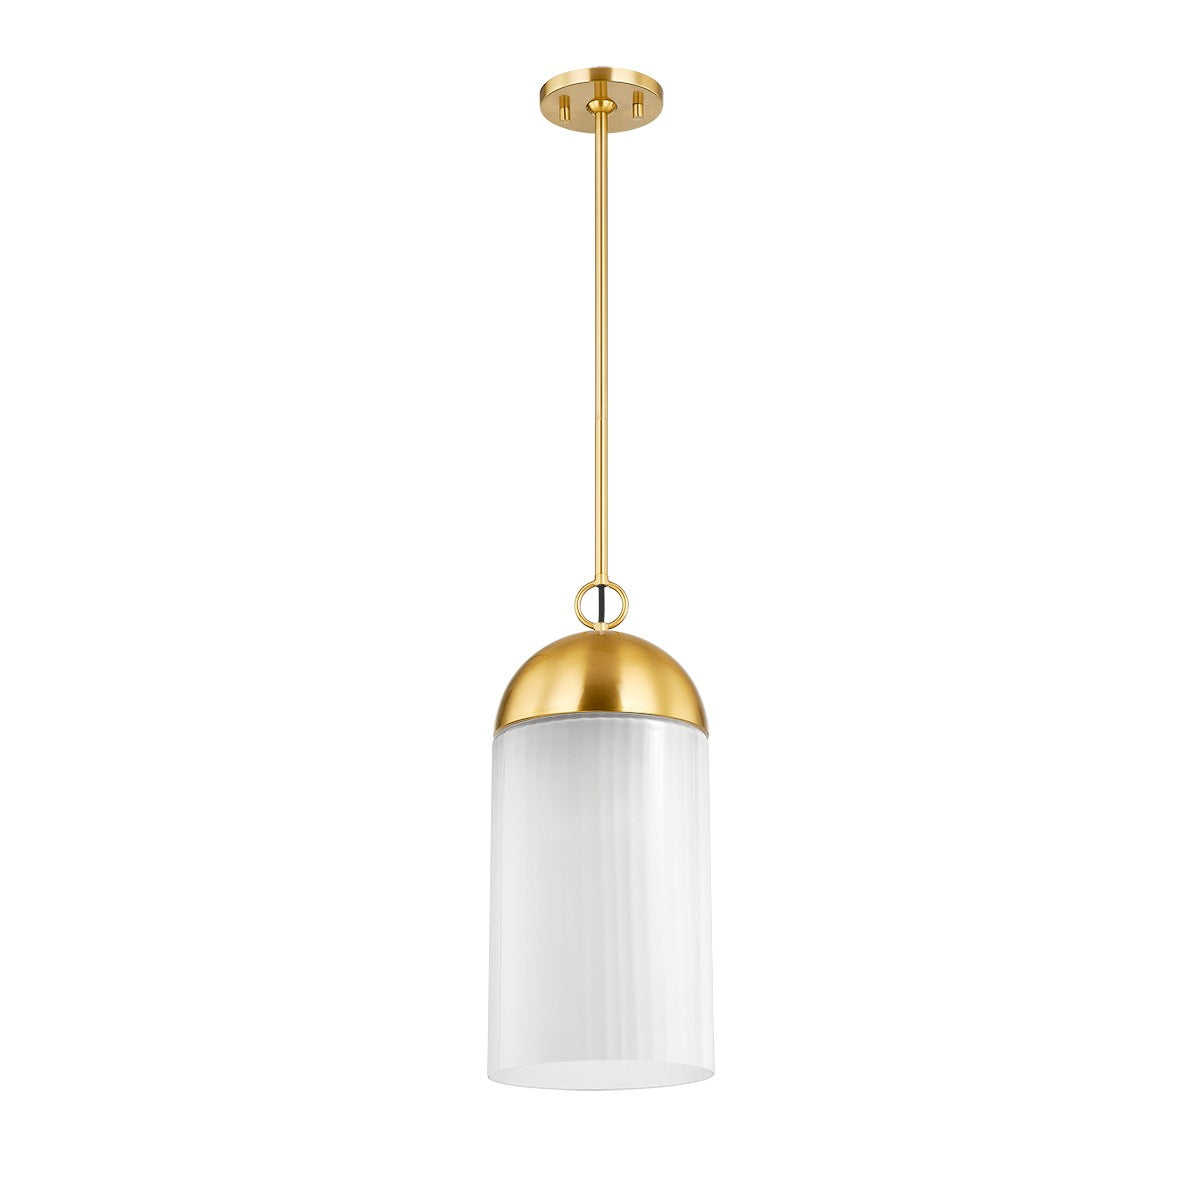 Mitzi - H796701-AGB - One Light Pendant - Emory - Aged Brass